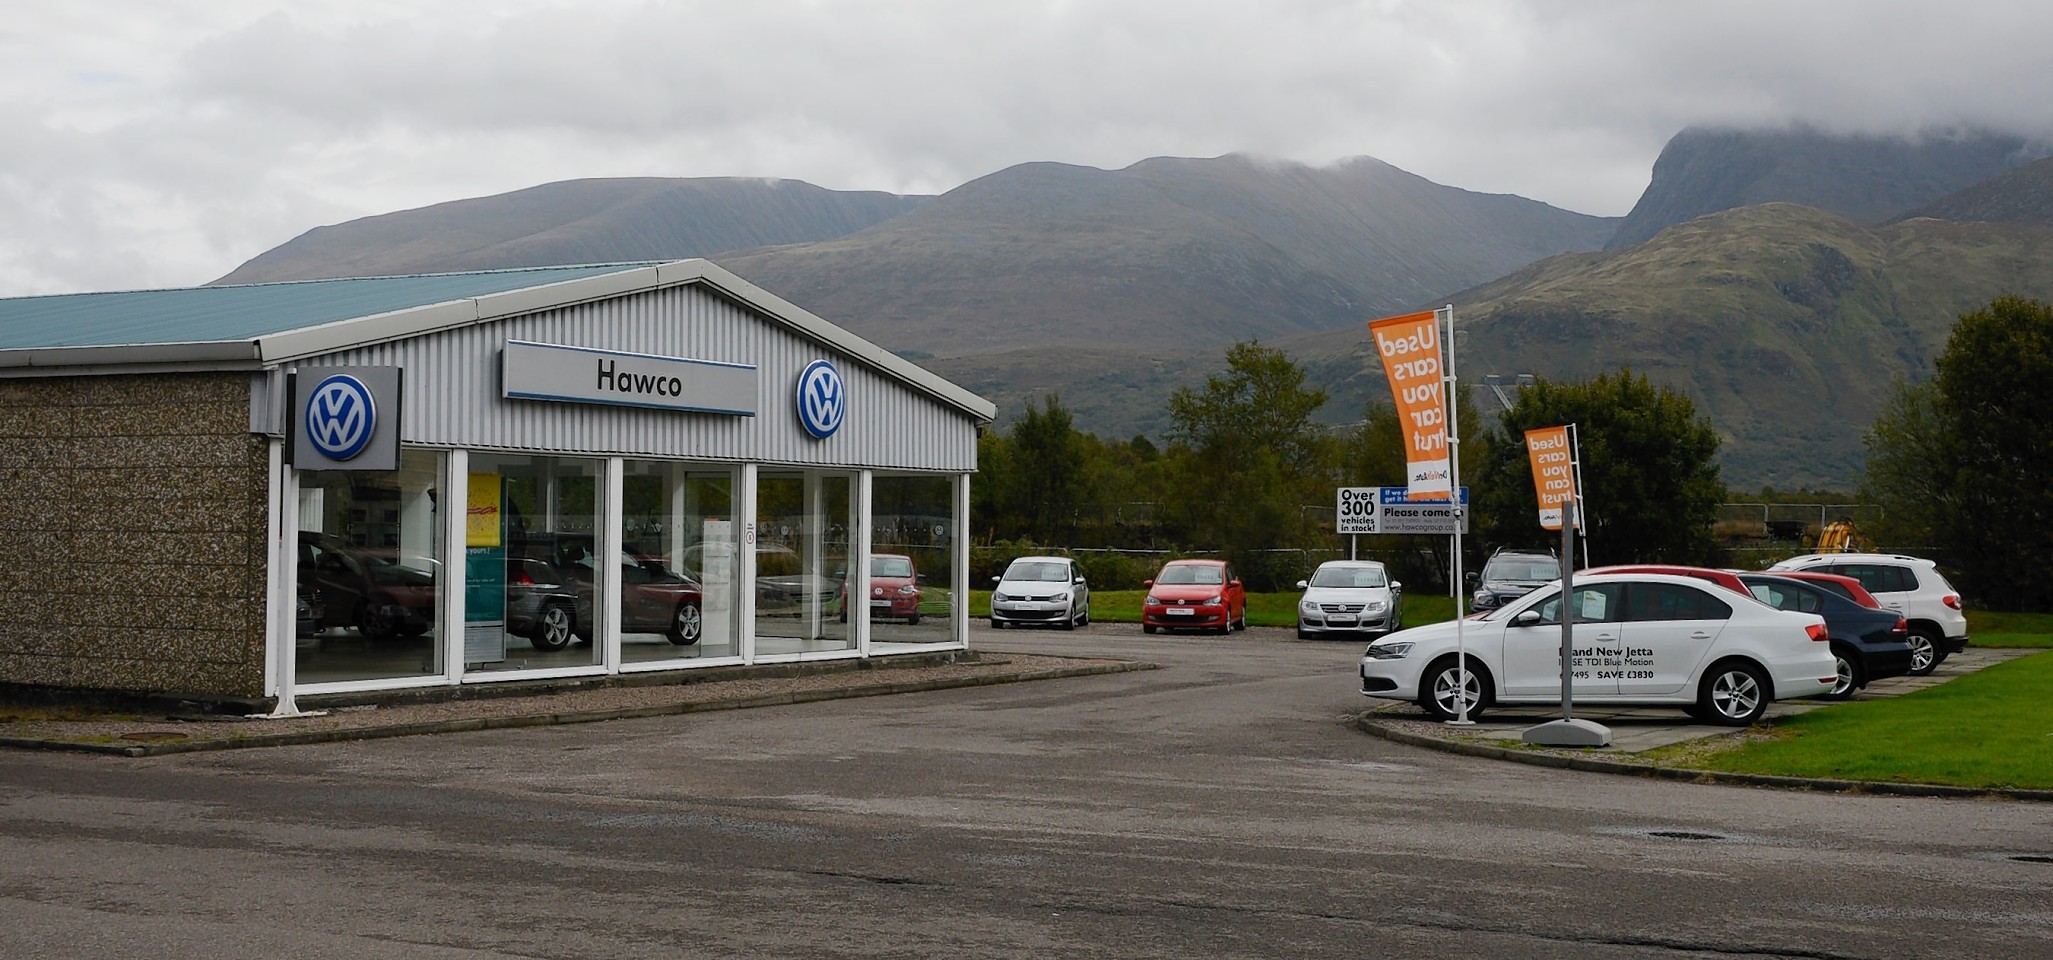 Six jobs will be lost as Highland car dealership closes ...